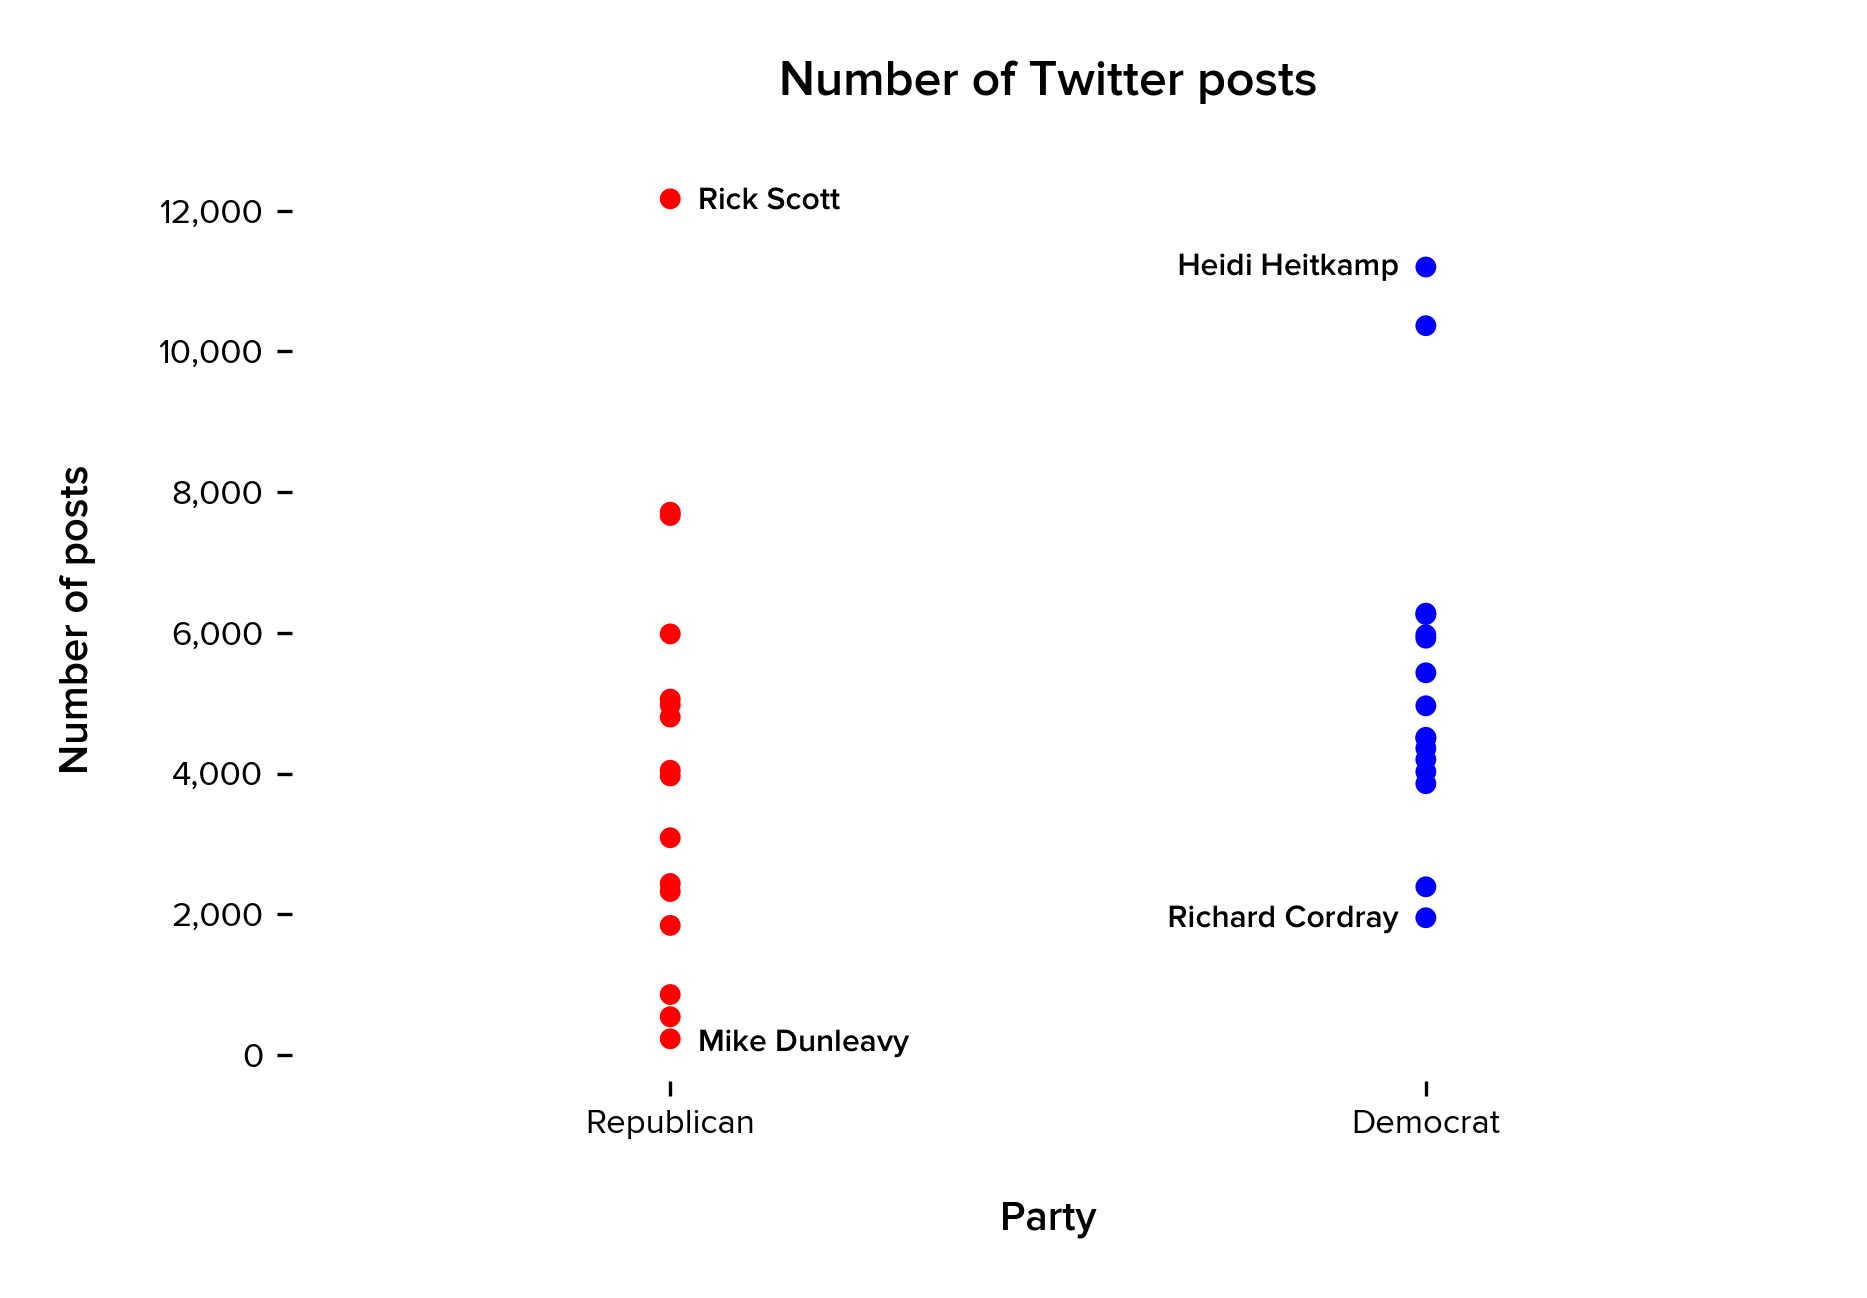  Distribution of the number of Twitter posts by political party. Each dot represents an individual candidate. We have indicated which candidates in each party have the highest and lowest number of posts on Twitter. 